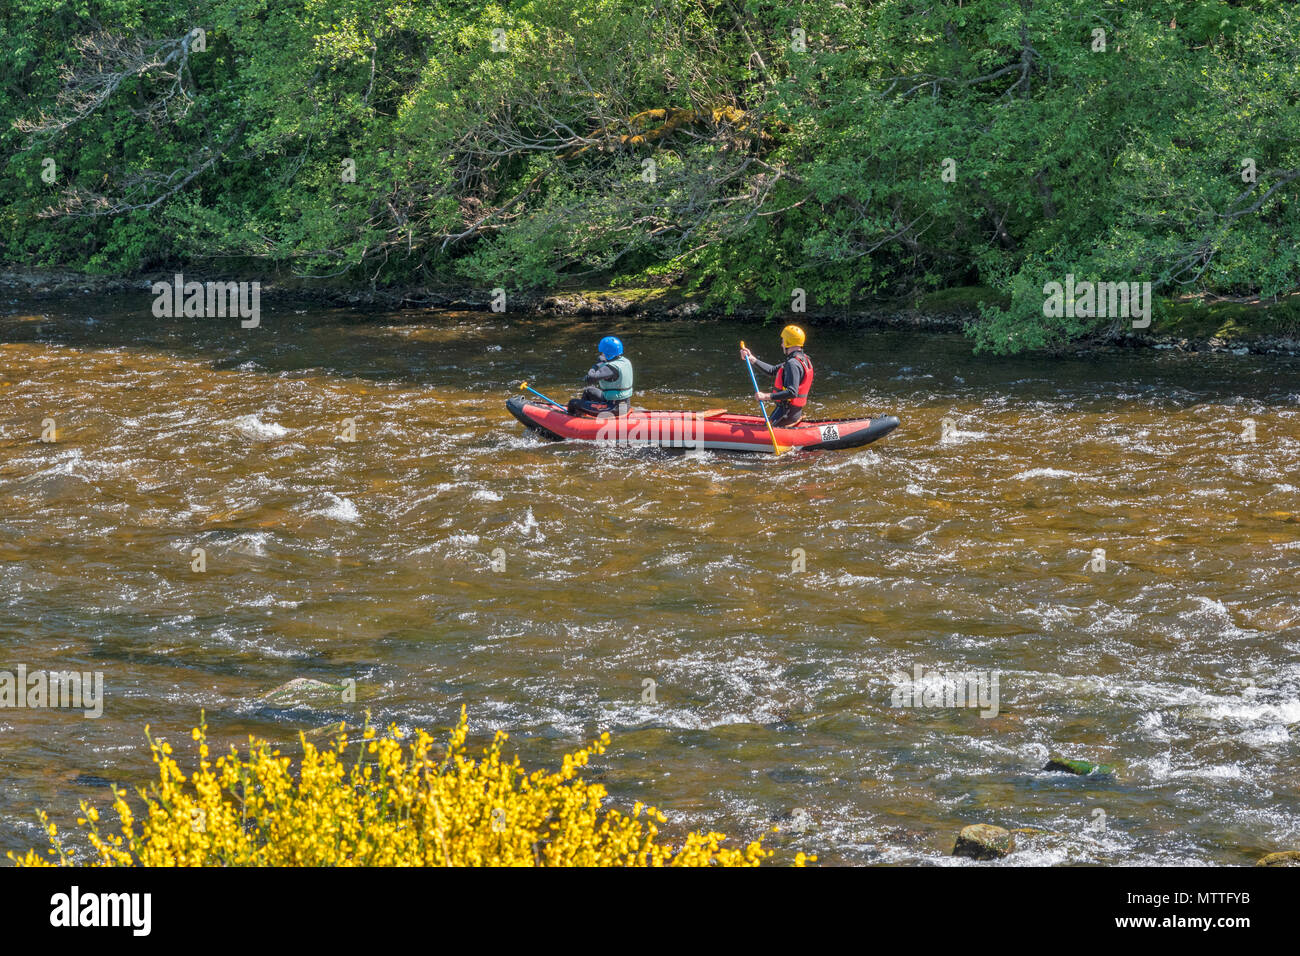 RIVER SPEY SPEYSIDE SCOTLAND CANOE CANOEIST SPRINGTIME ON THE SPEY AND A RED AND BLUE INFLATABLE CANOE OR KAYAK Stock Photo